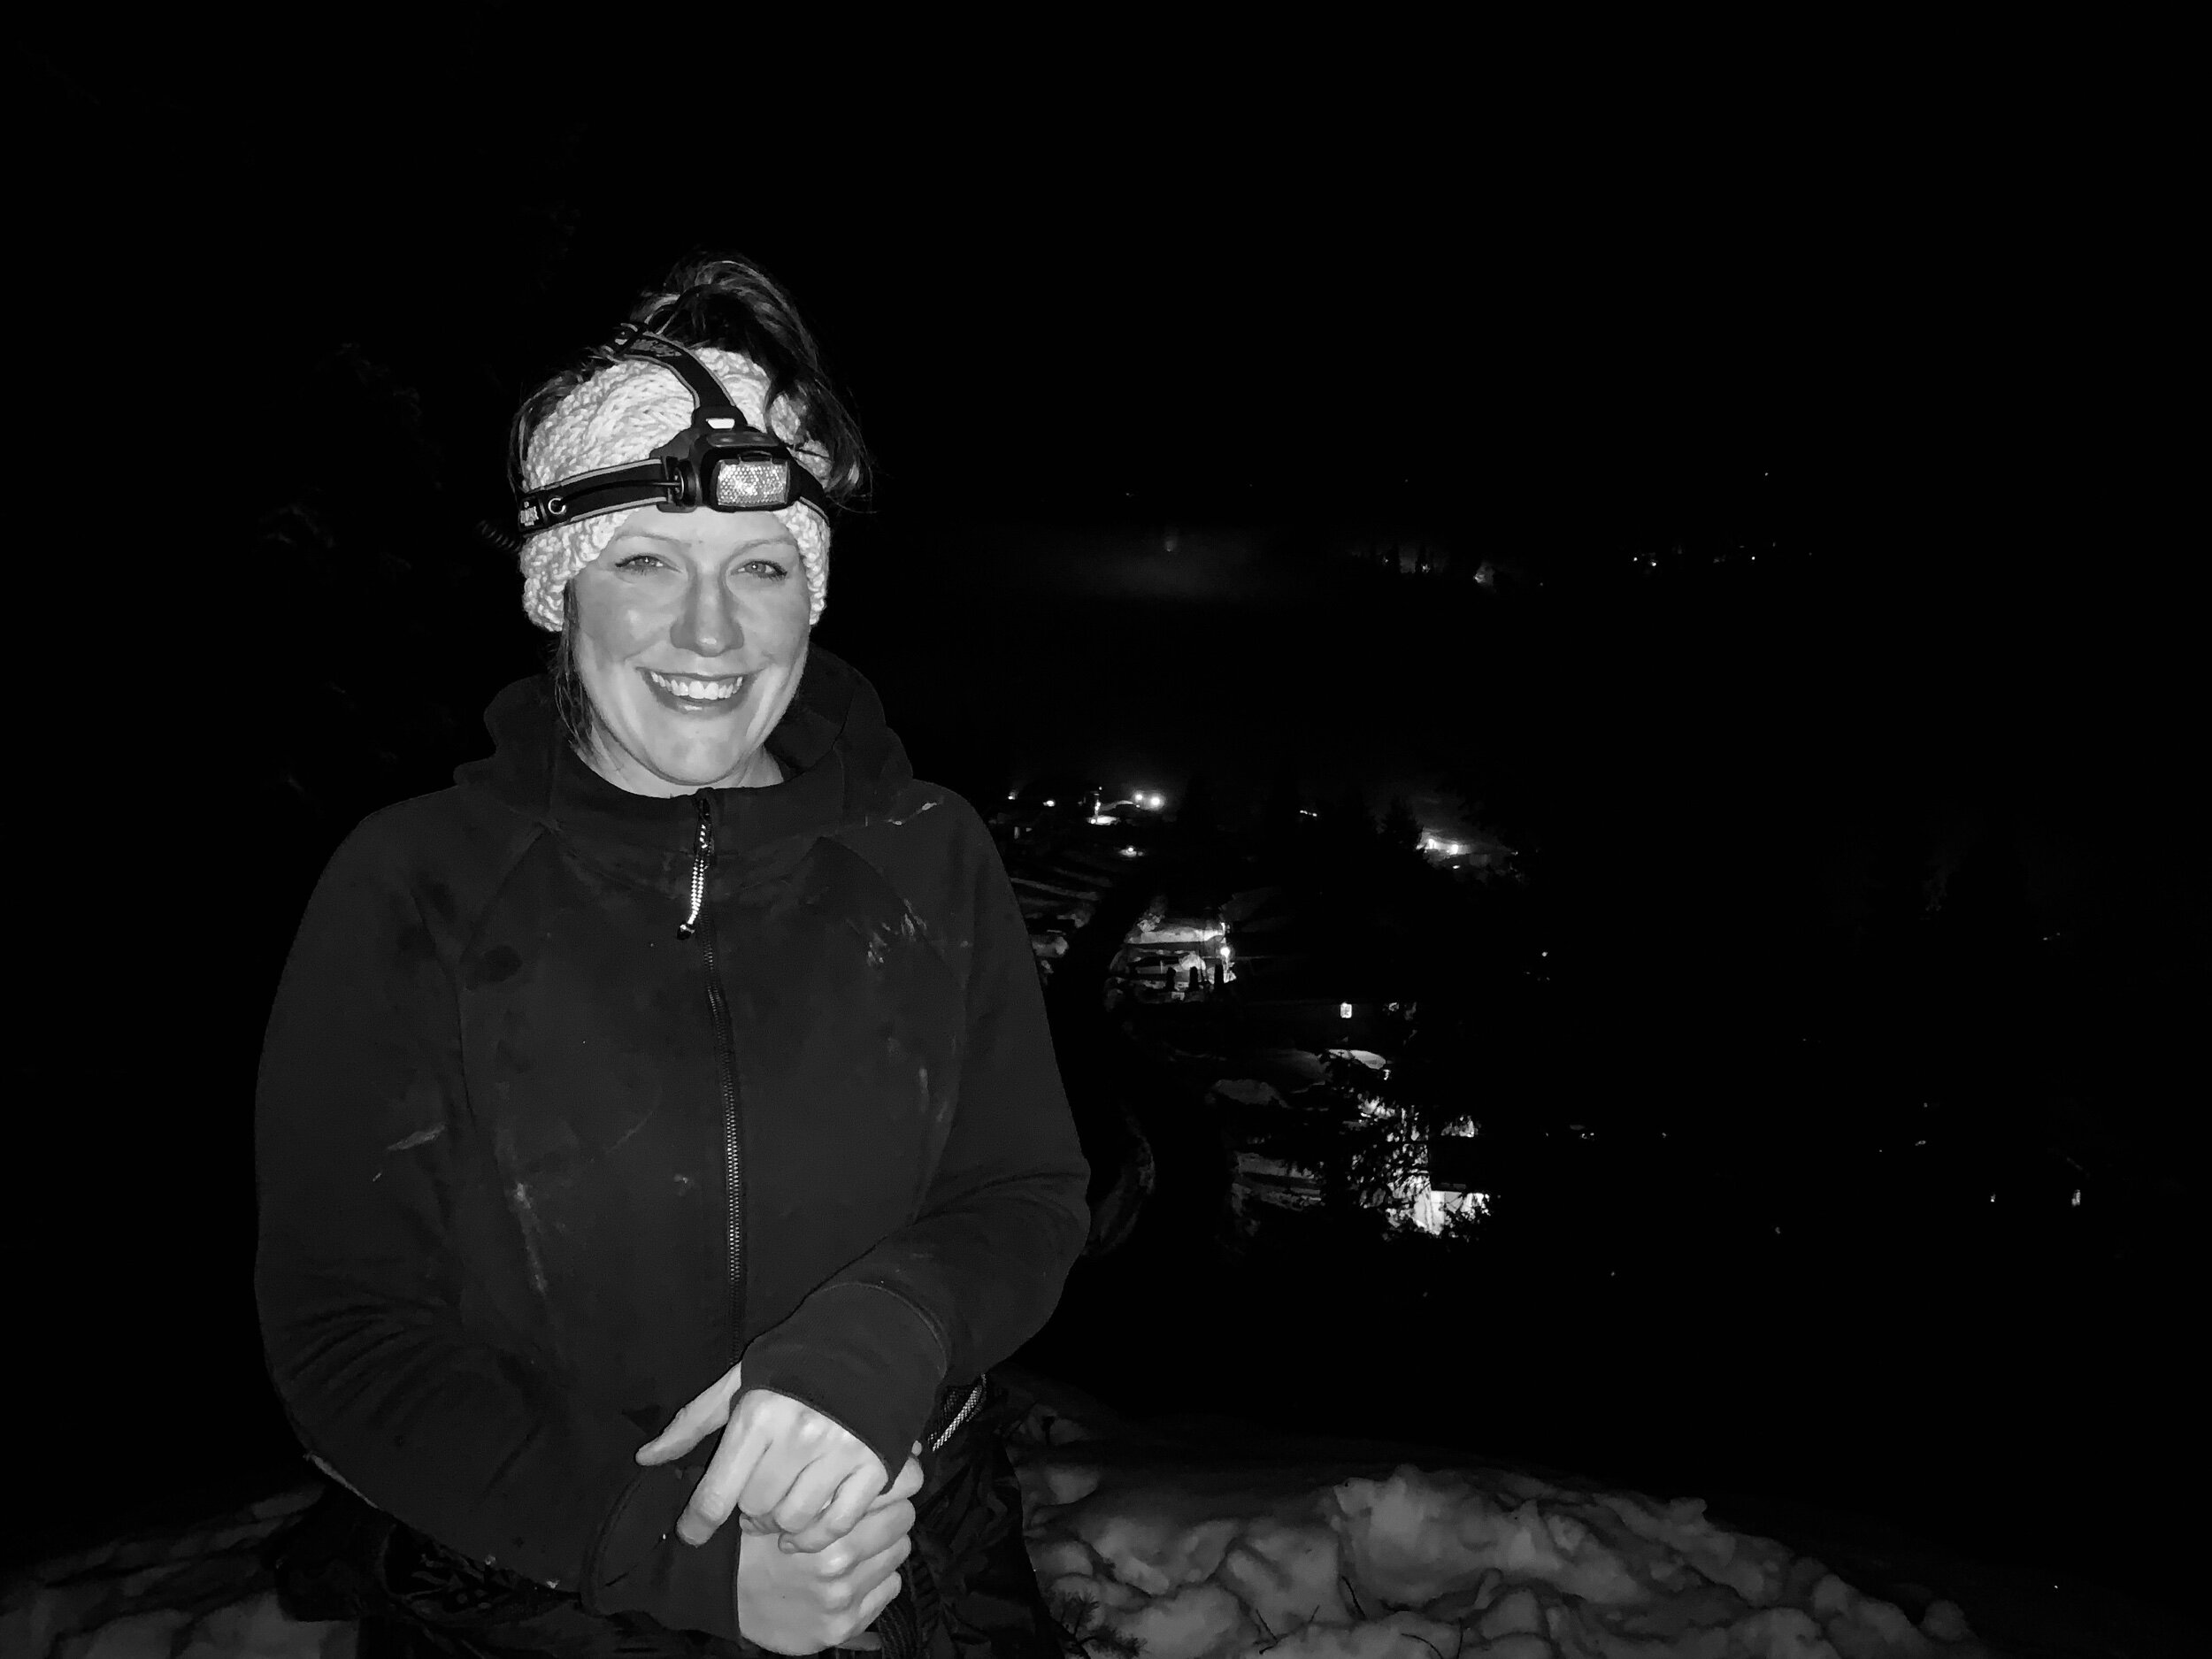 Shuswap Adventure Girl | Night snowshoe on the Balmoral trails in Blind Bay